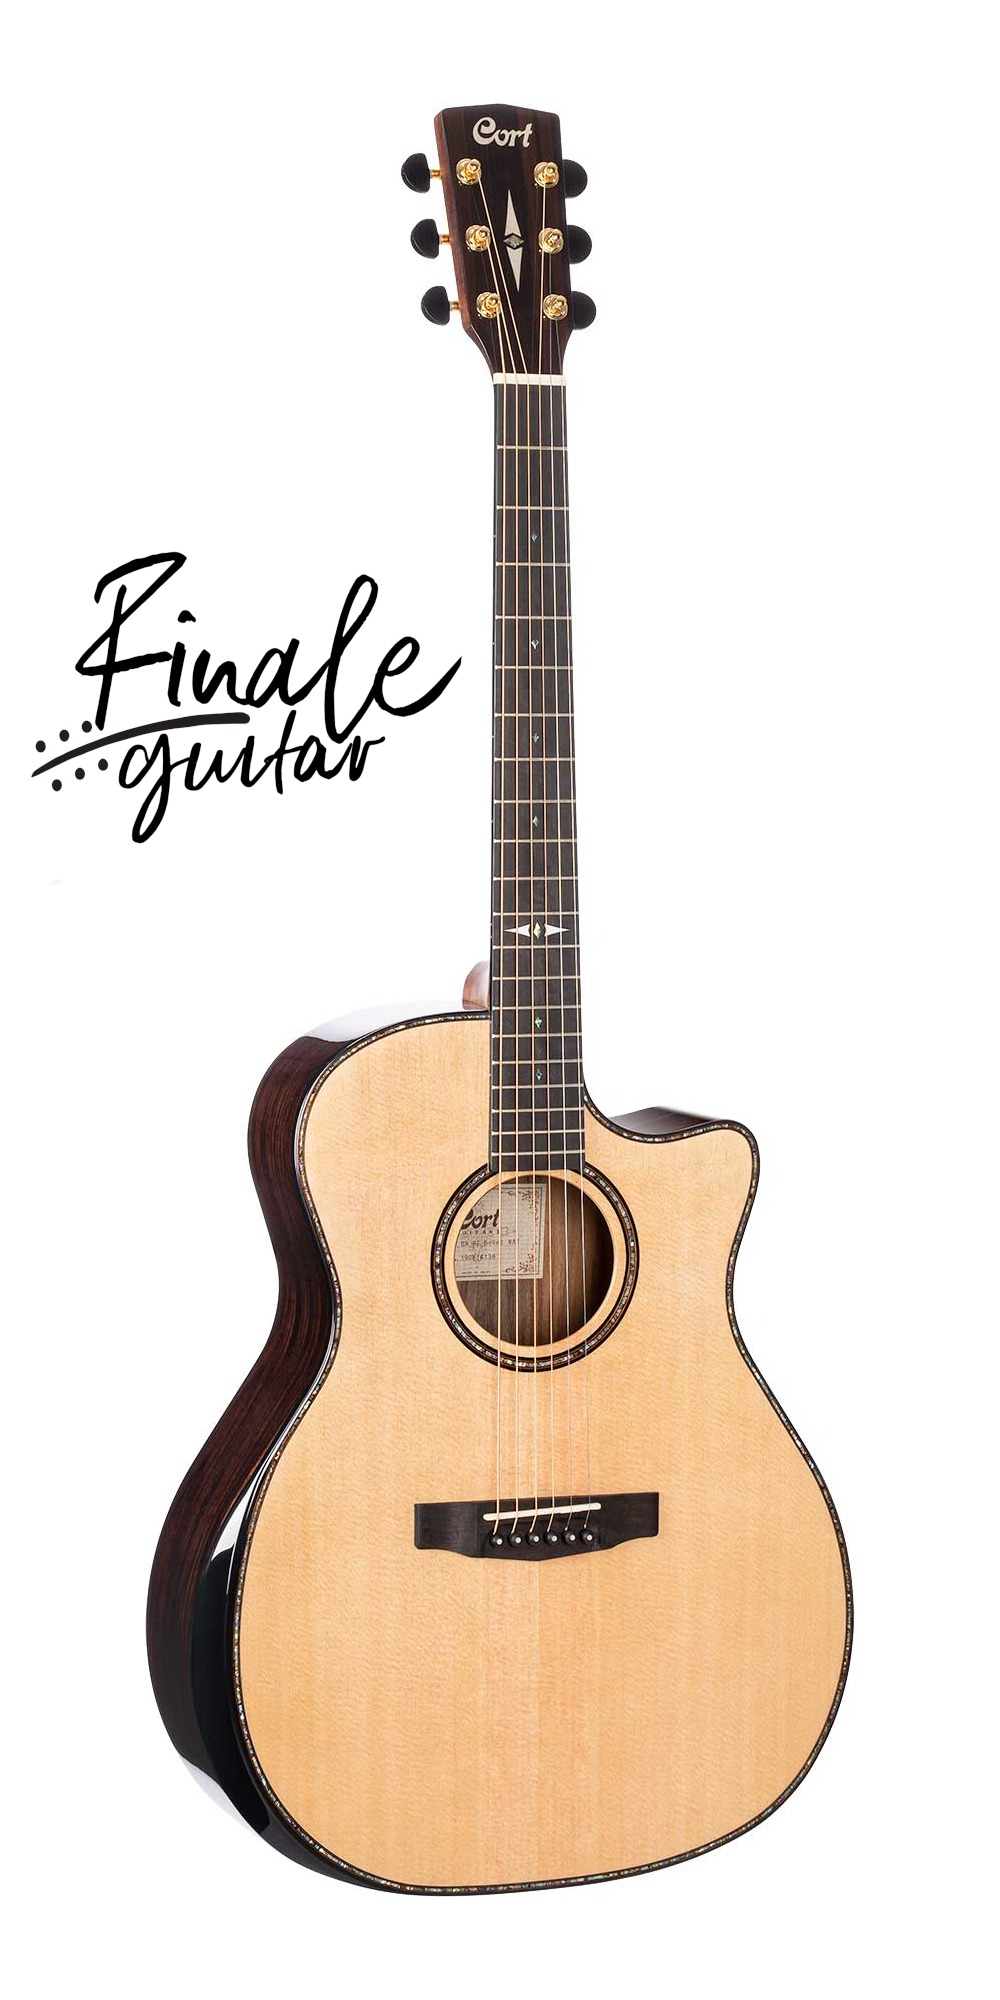 Cort GA PF Bevel Nat electro-acoustic guitar for sale in our Sheffield guitar shop, Finale Guitar